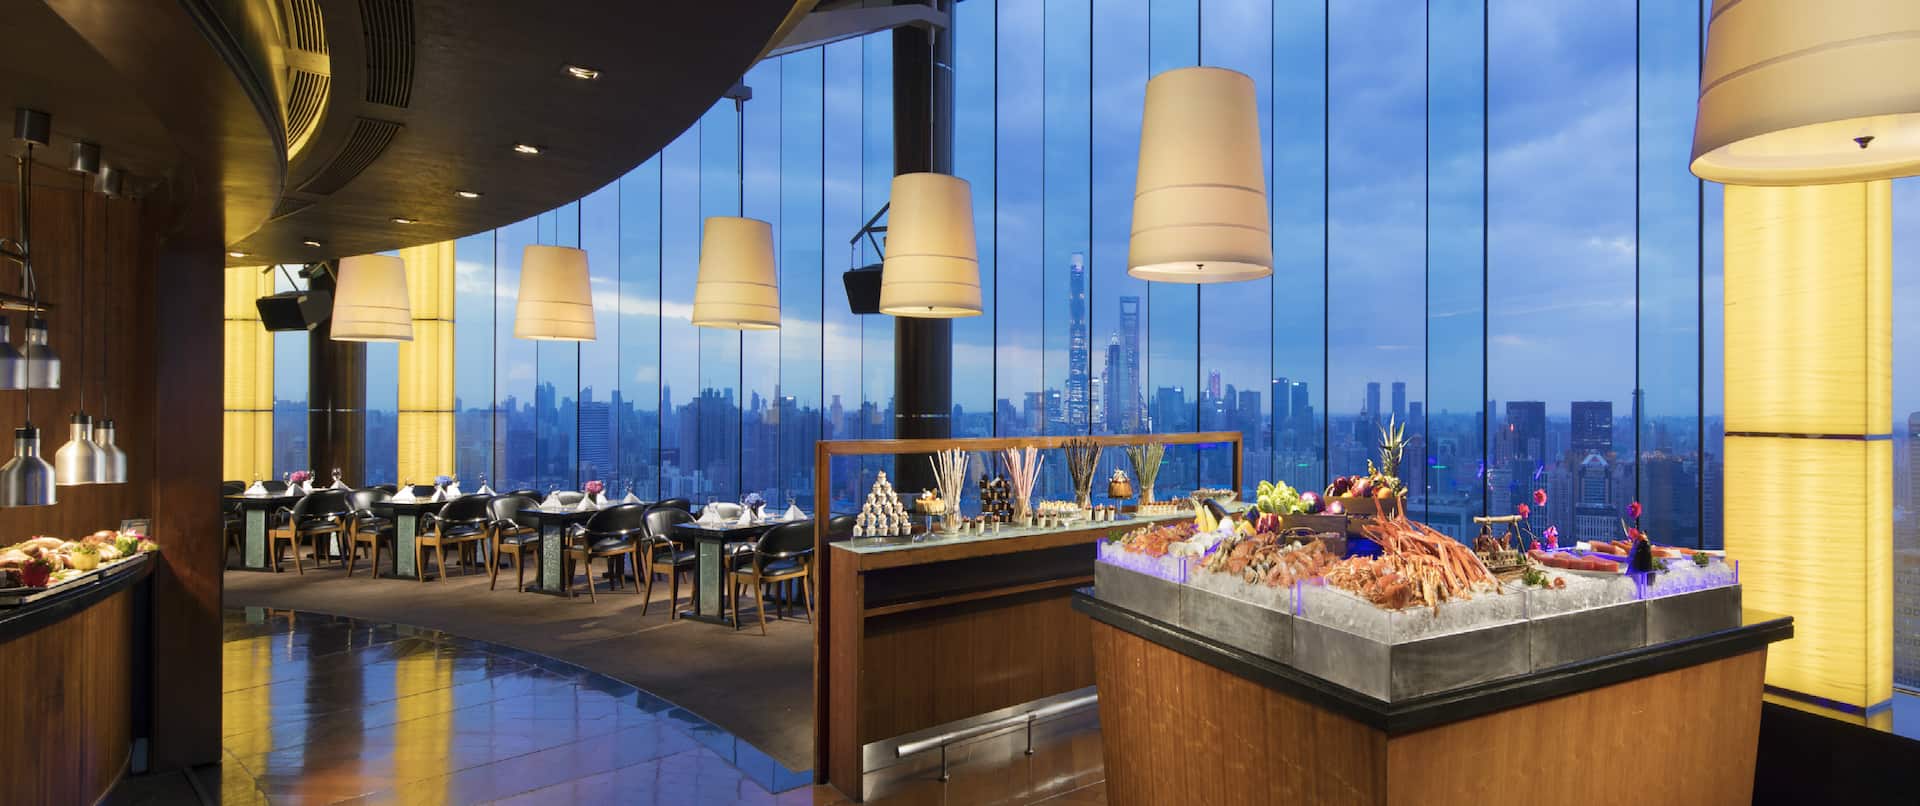 Restaurant Dining Area with City View